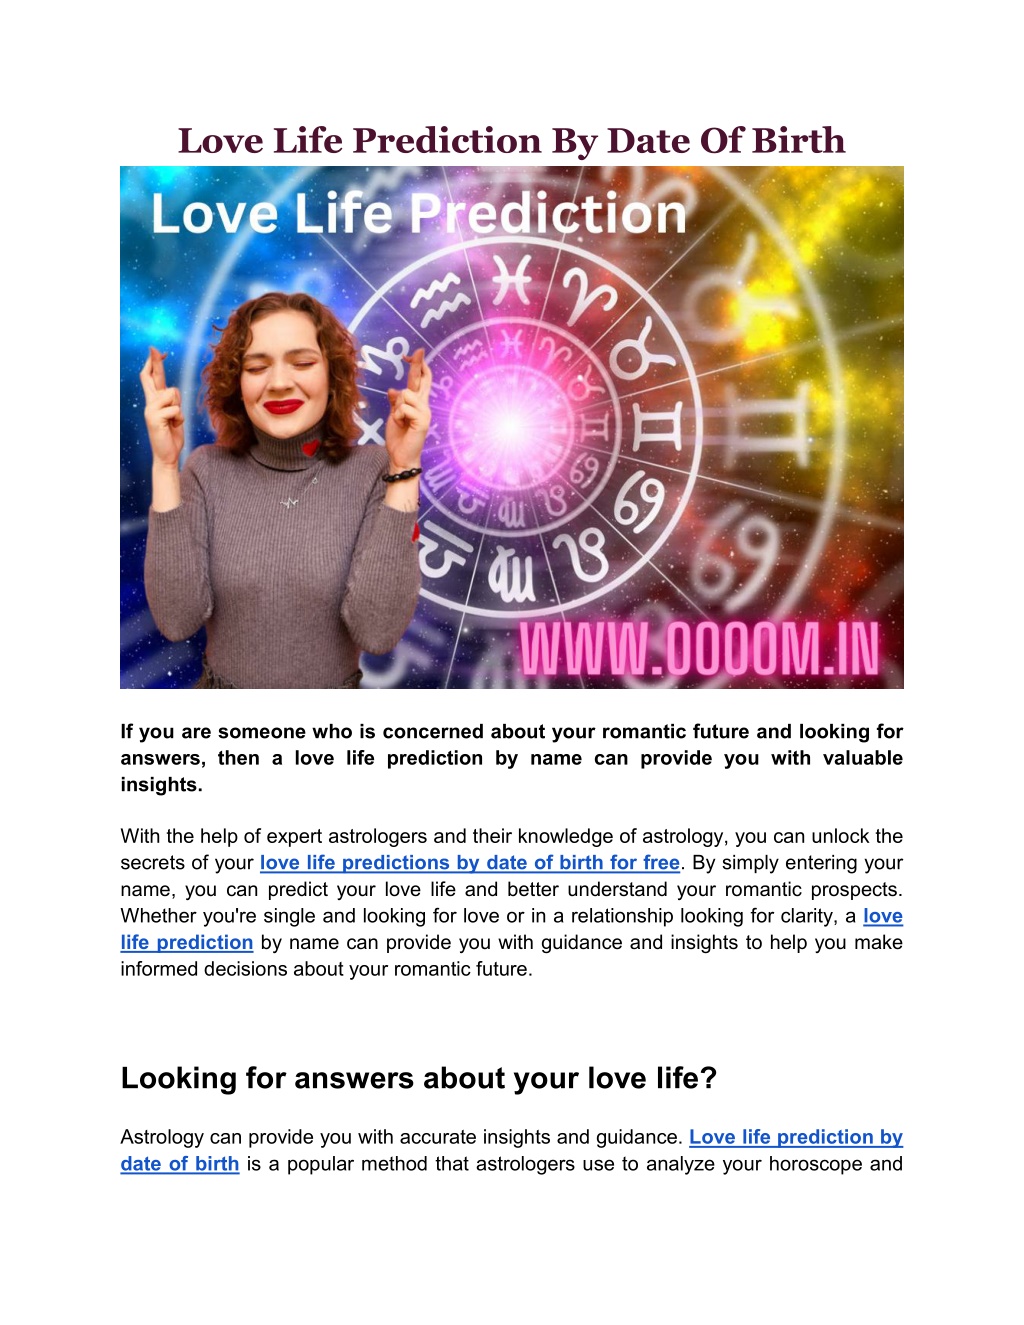 PPT Love Life Prediction By Date Of Birth PowerPoint Presentation